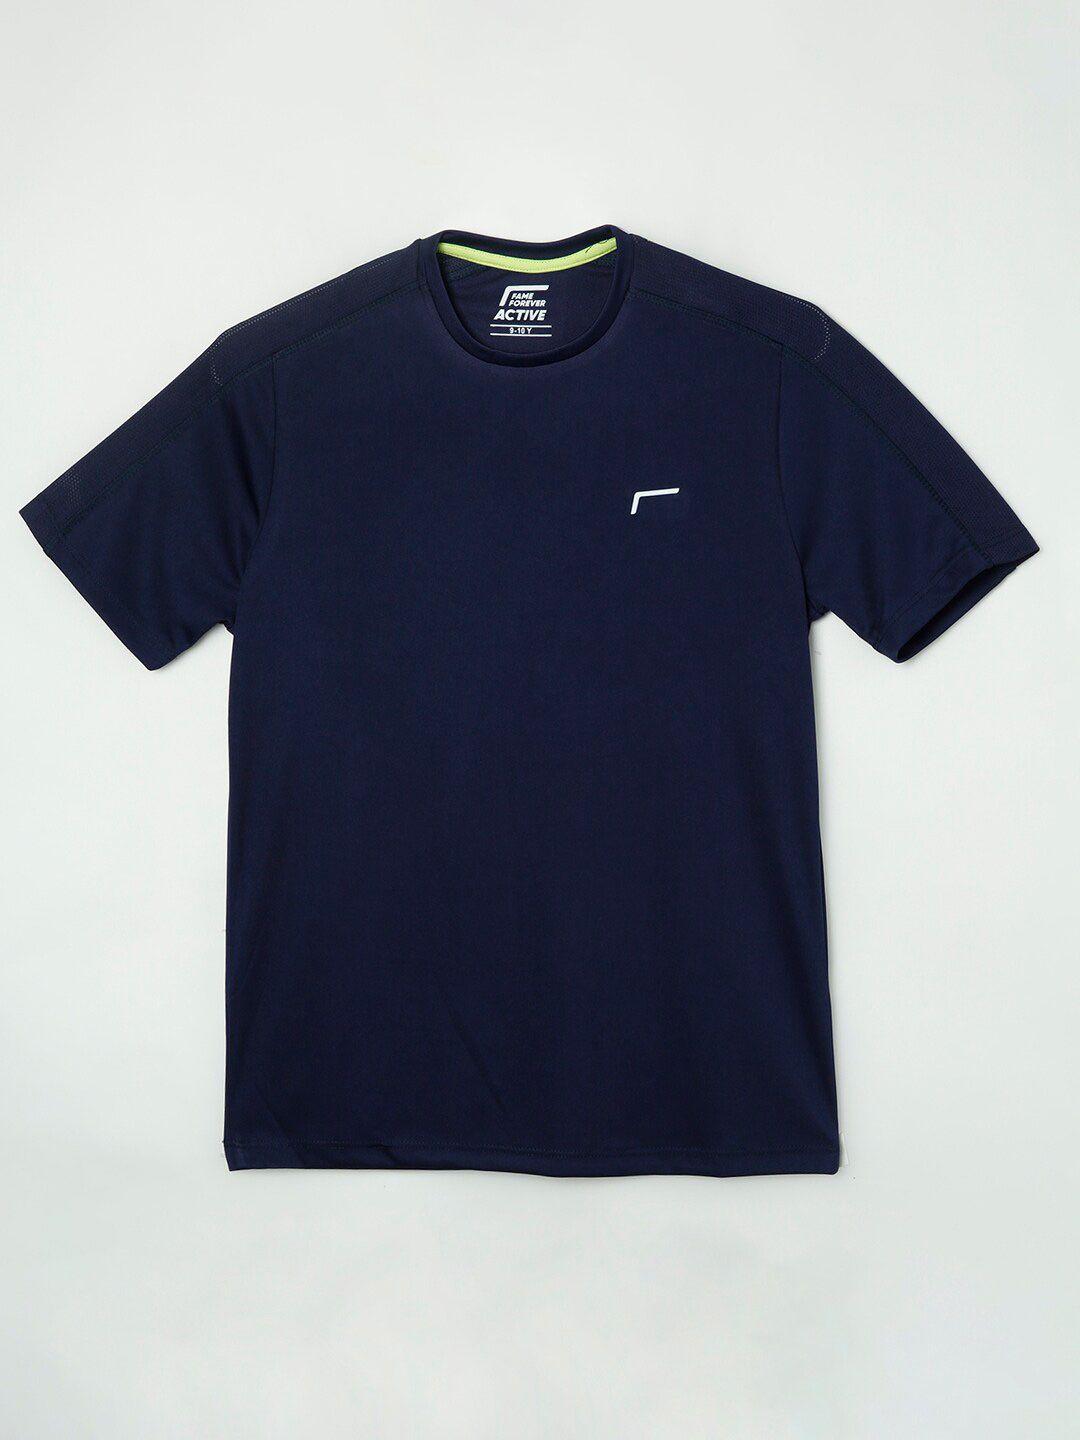 fame forever by lifestyle boys navy blue t-shirt